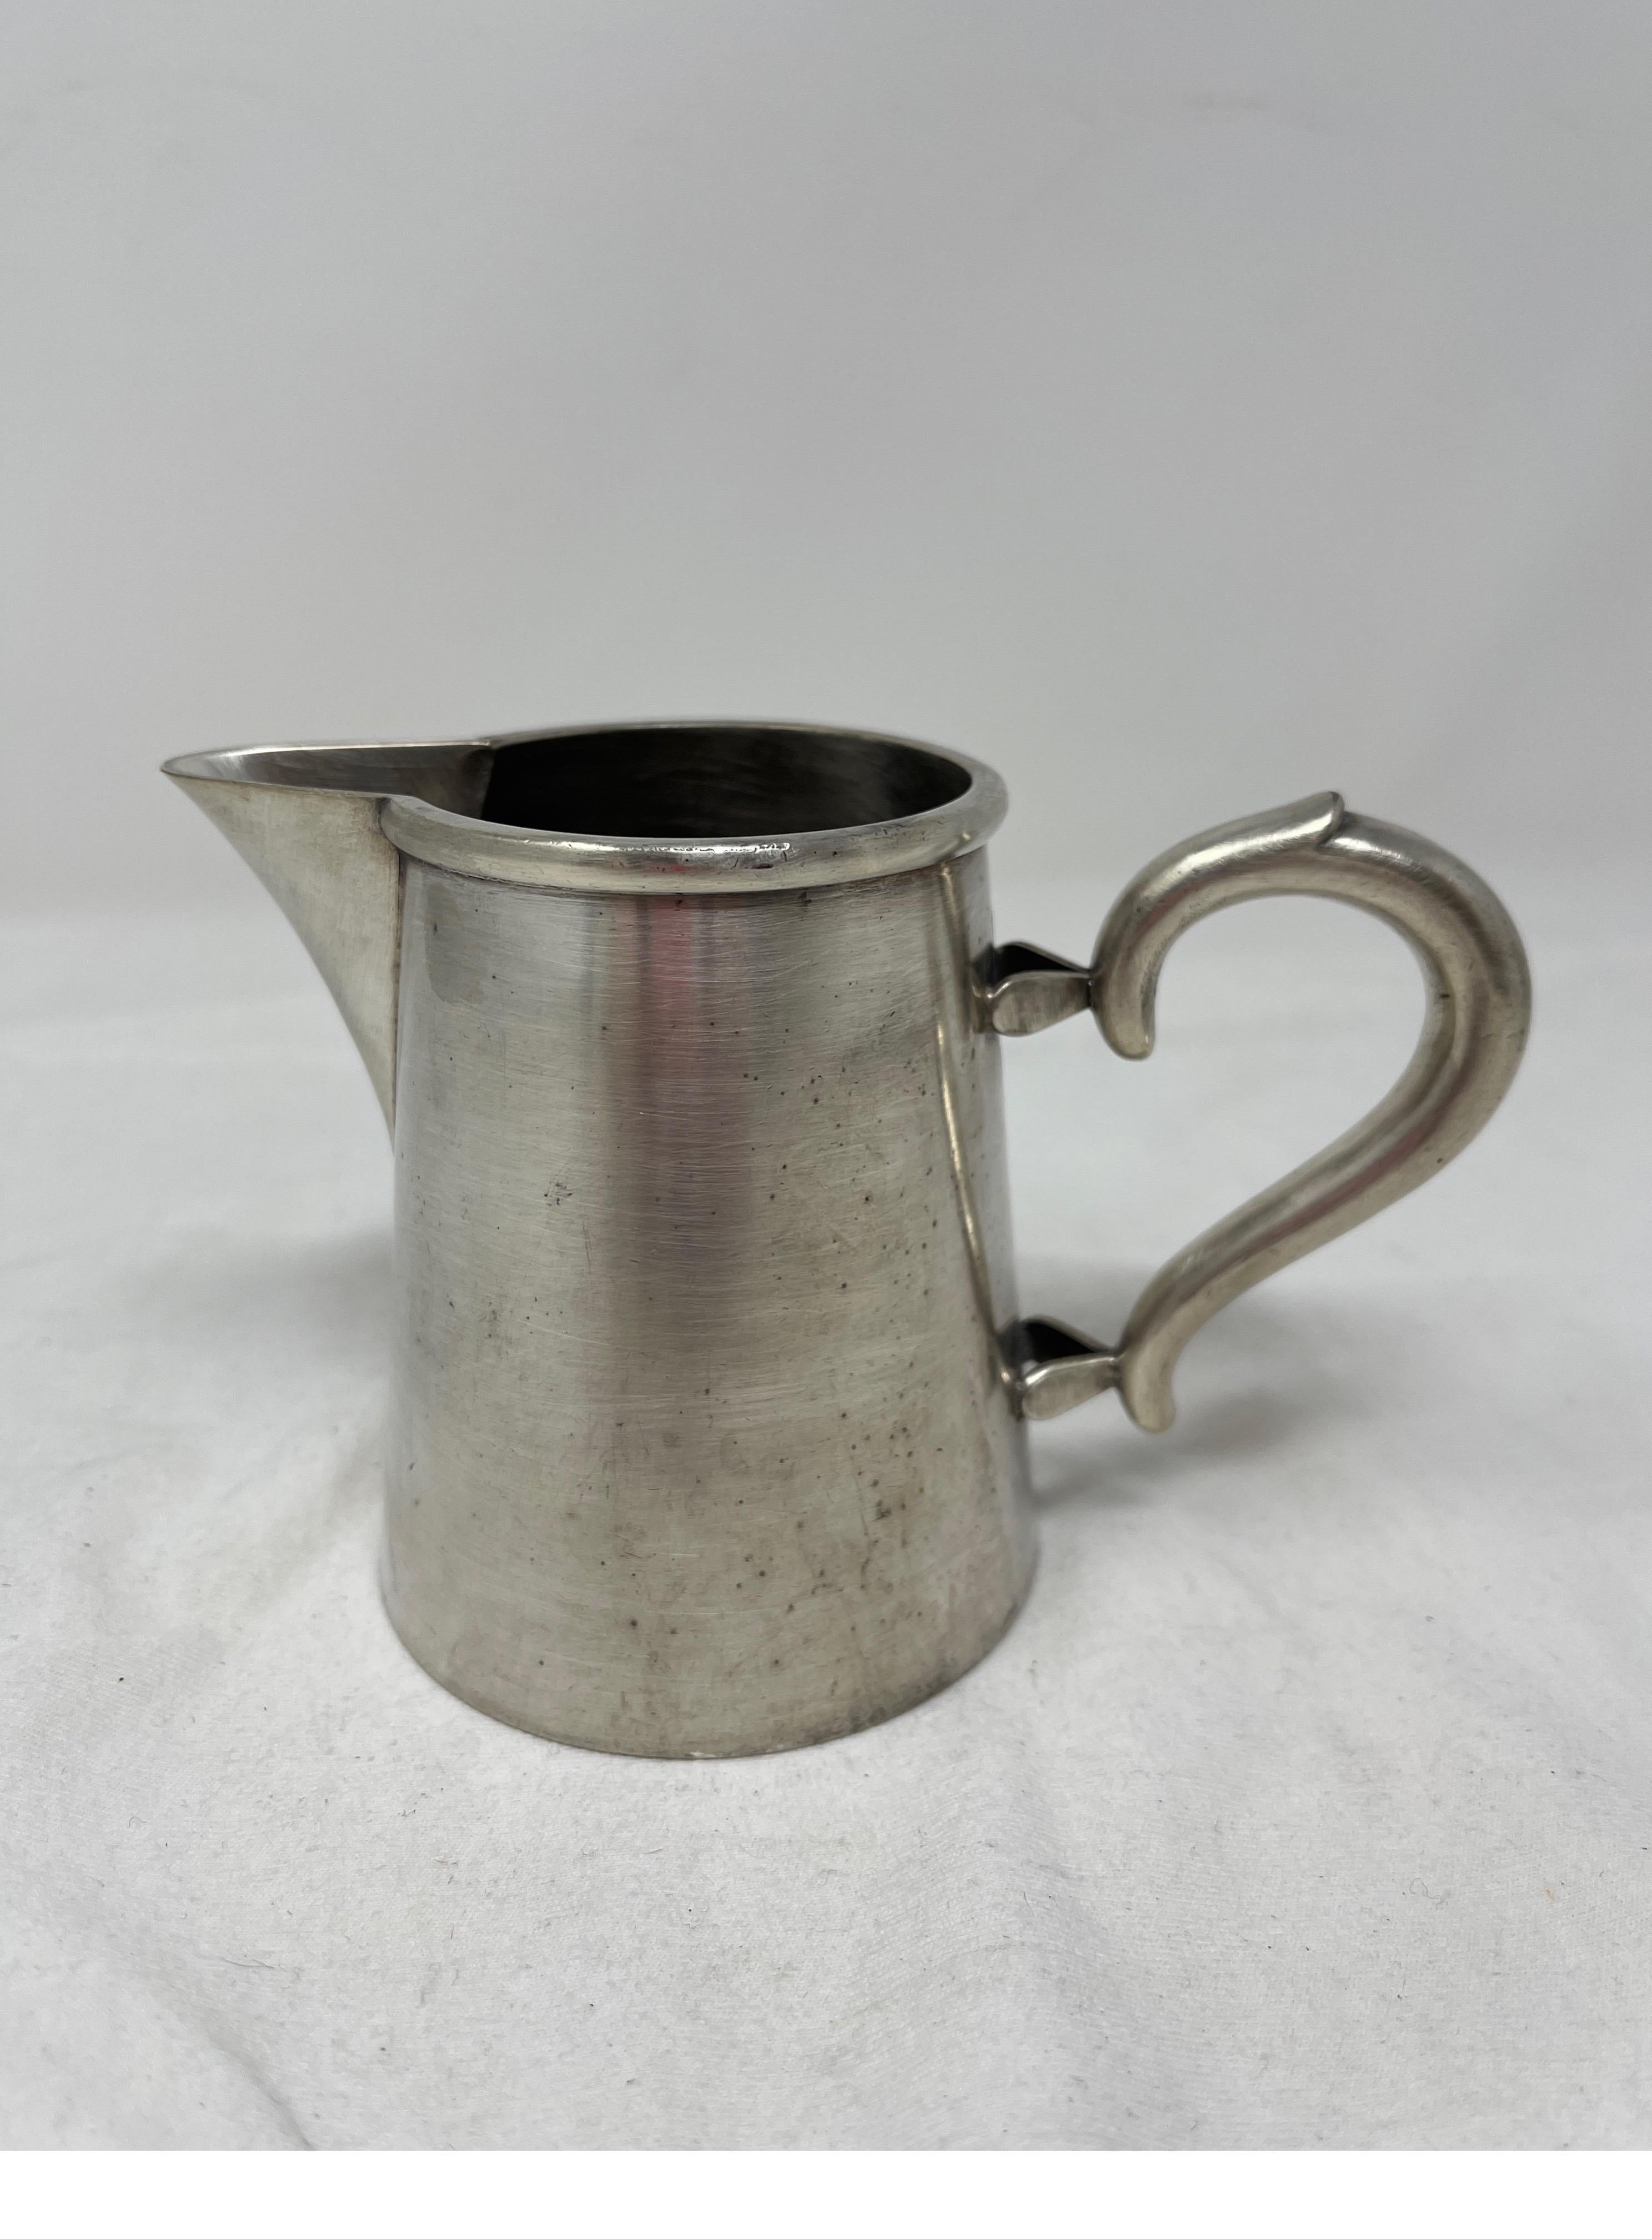 Enjoy your coffee or tea with this adorable little 19th century Hotel Silver creamer. Elevate your morning routine or use this pitcher to old pens, pencils or a fresh cut flower.
Measures: 2.5